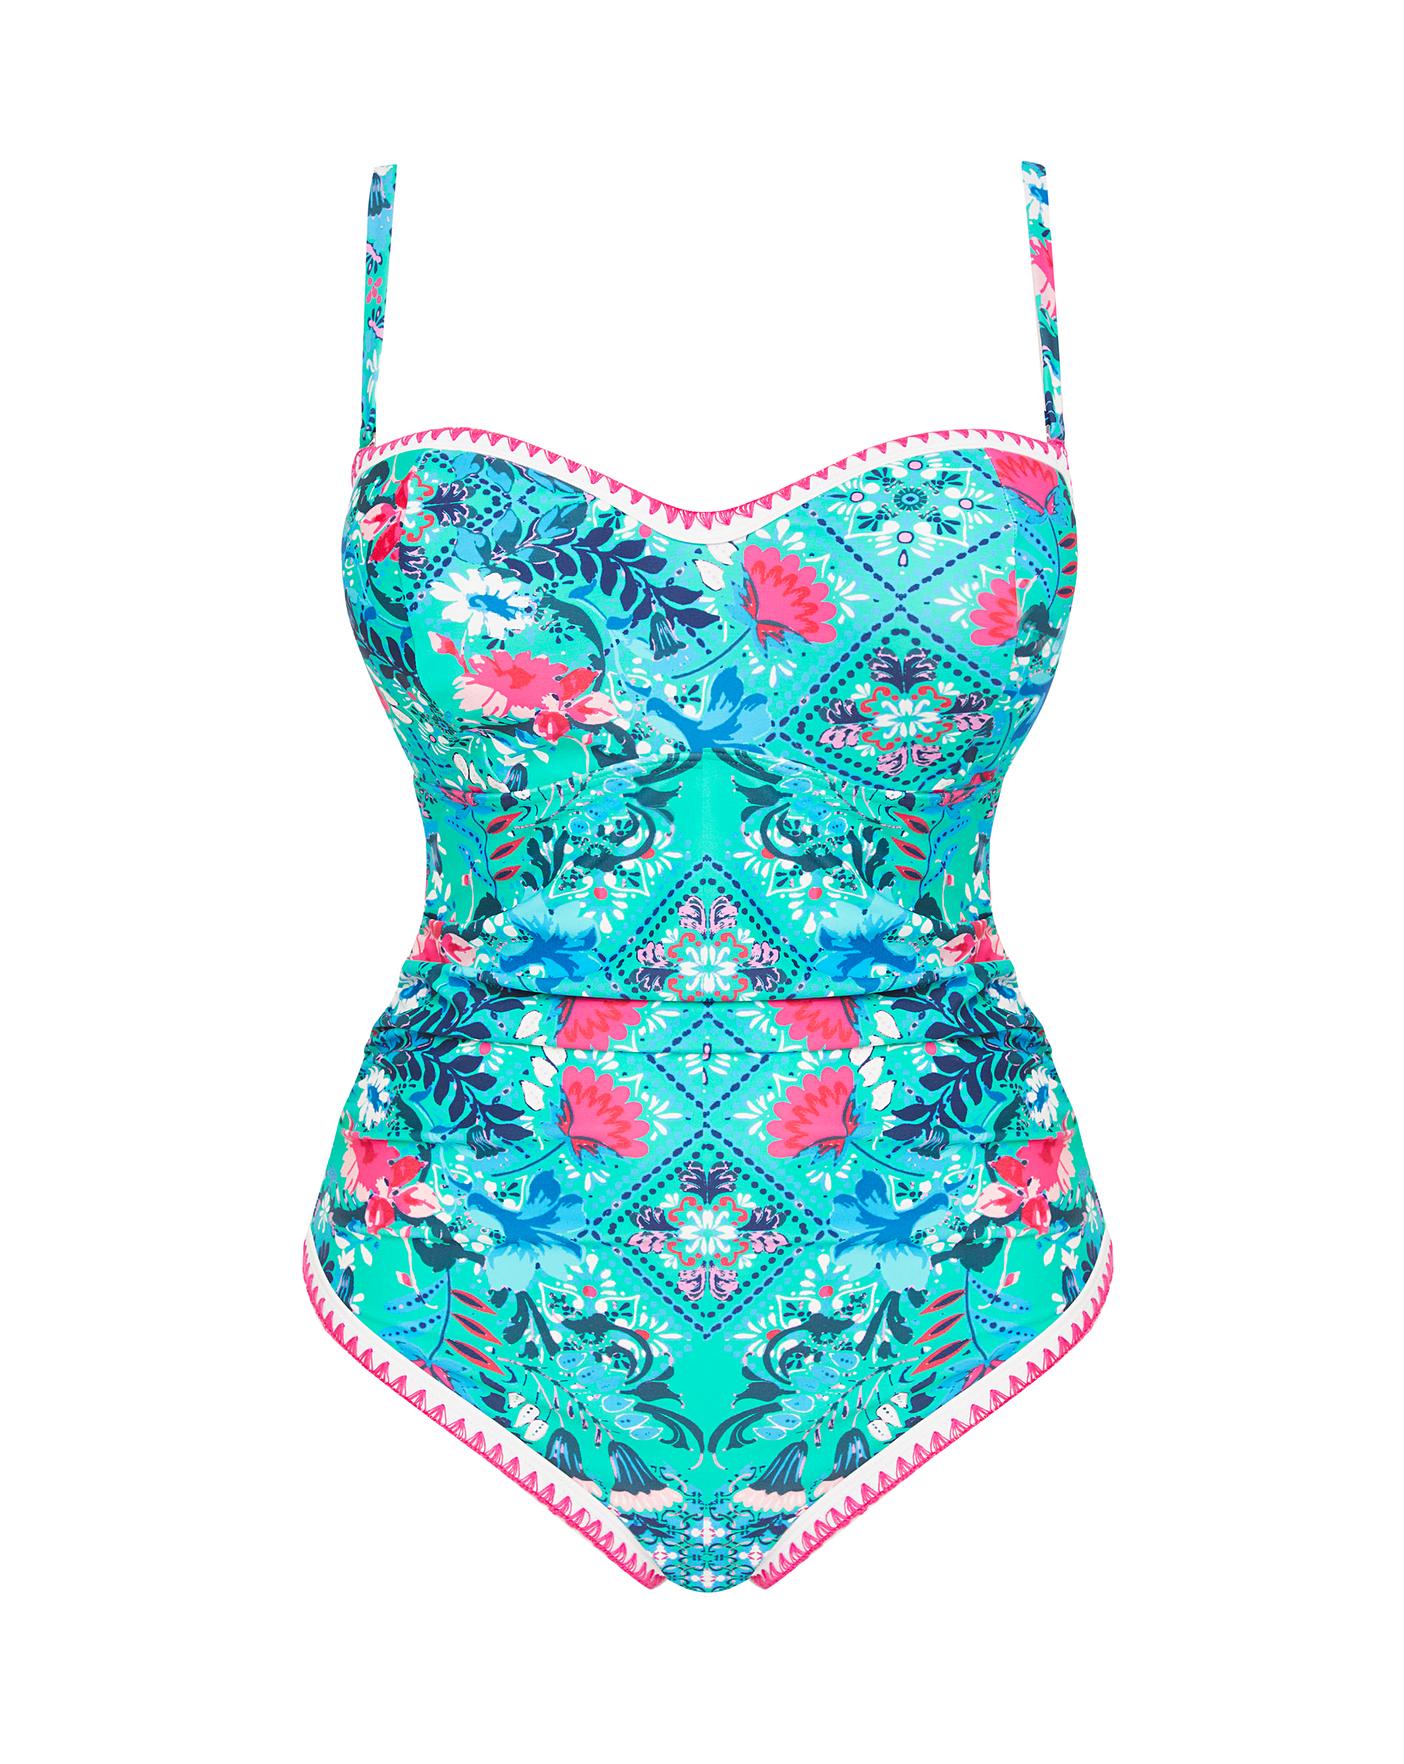 The New Must-Have Figleaves Swimwear Collection - GLOSSYBOX Beauty